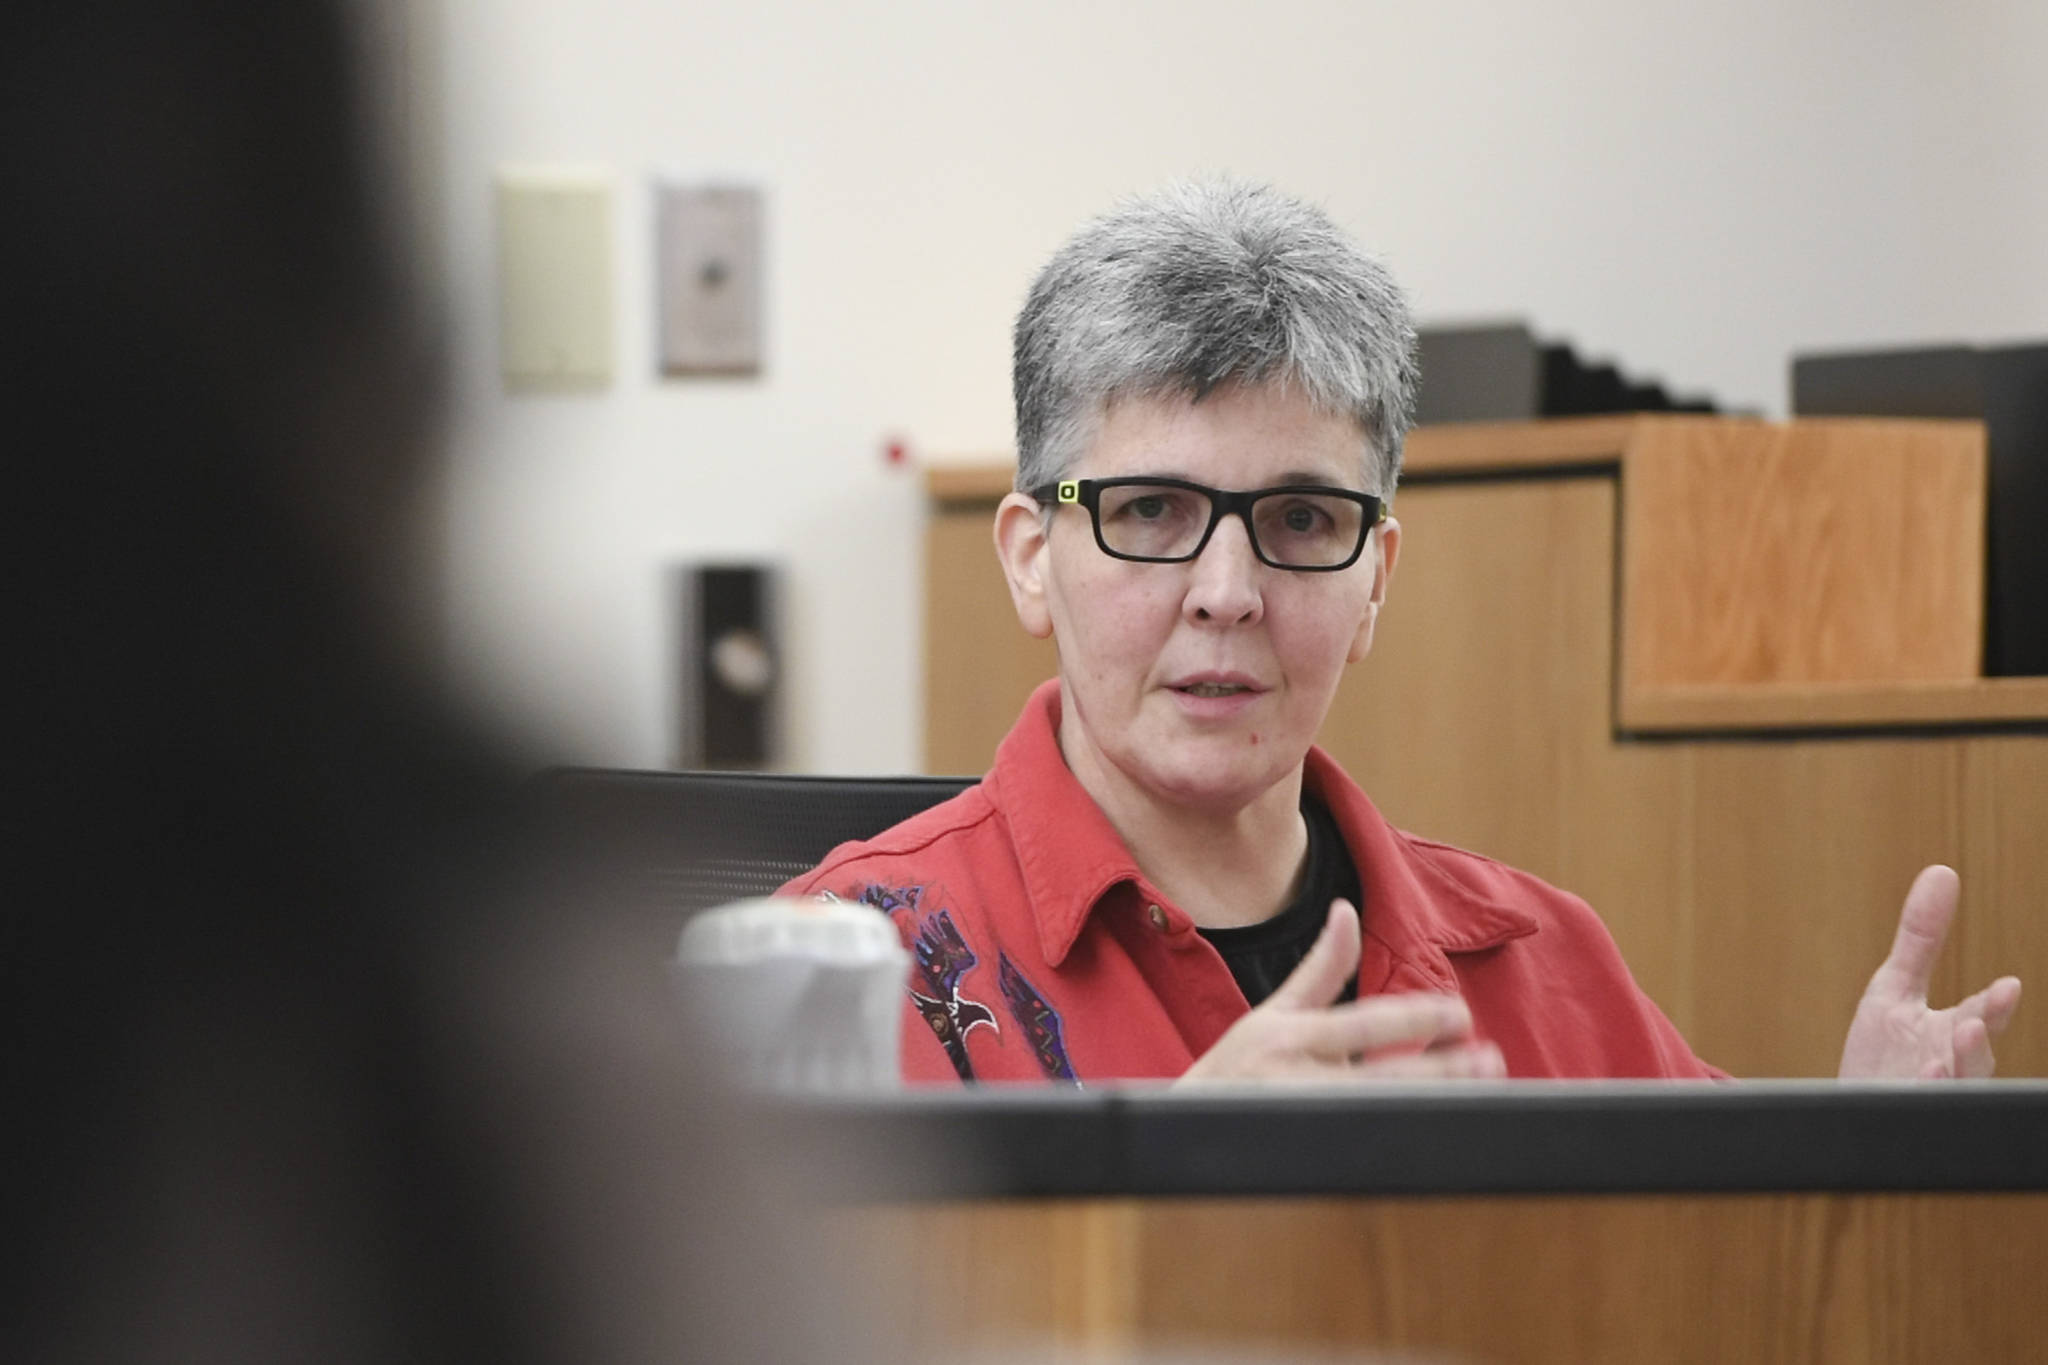 Regan Tweedy, mother of James LeBlanc-Tweedy, answers questions on the witness stand to questioning by defense attorney Natasha Norris in Juneau Superior Court on Tuesday, Sept. 24, 2019, during the trial of Laron Carlton Graham. Graham is facing two counts of first-degree murder for the November 2015 shooting deaths of 36-year-old Robert H. Meireis and 34-year-old Elizabeth K. Tonsmeire. (Michael Penn | Juneau Empire)